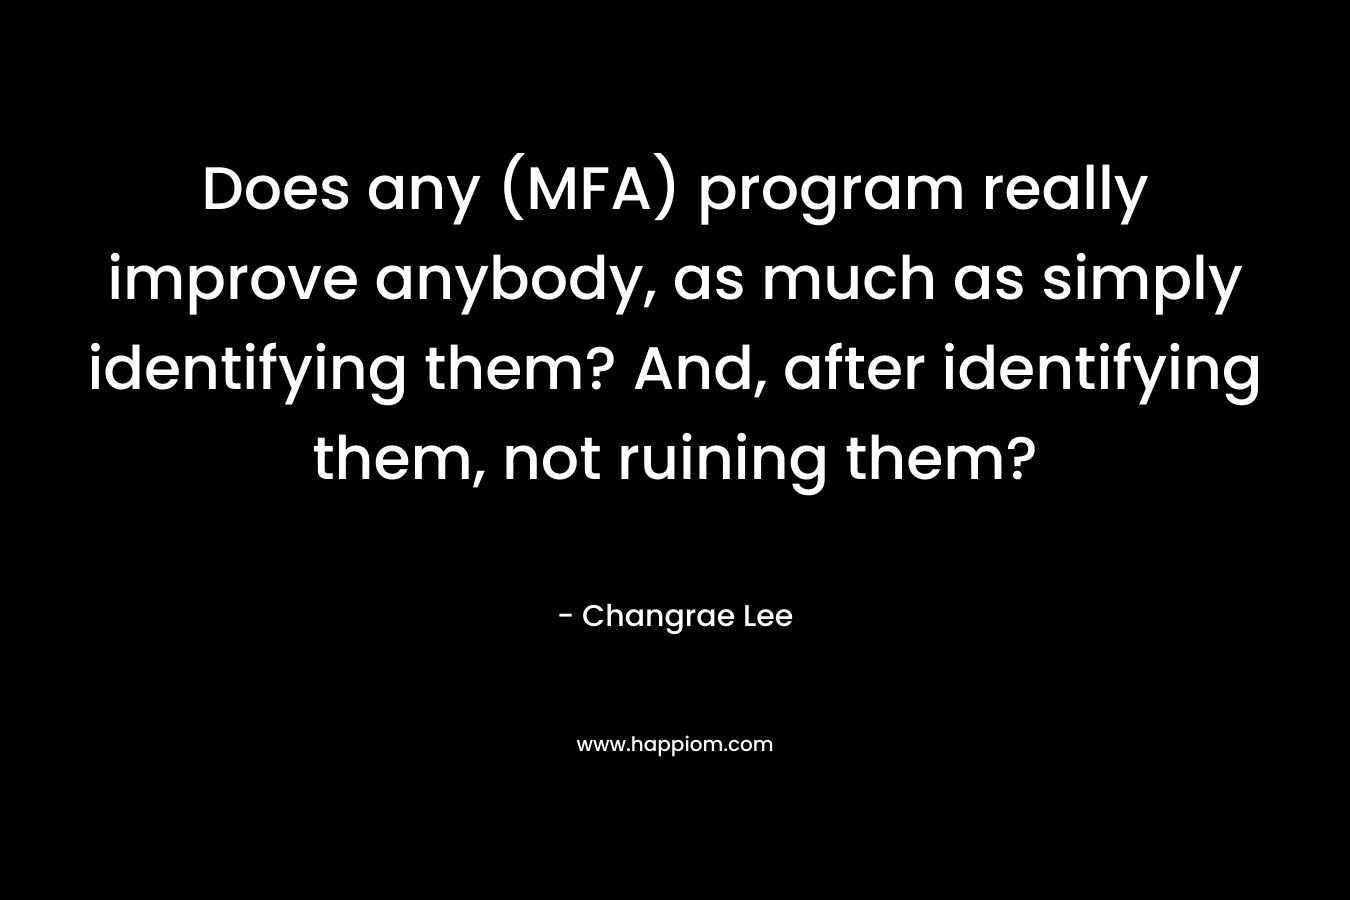 Does any (MFA) program really improve anybody, as much as simply identifying them? And, after identifying them, not ruining them?